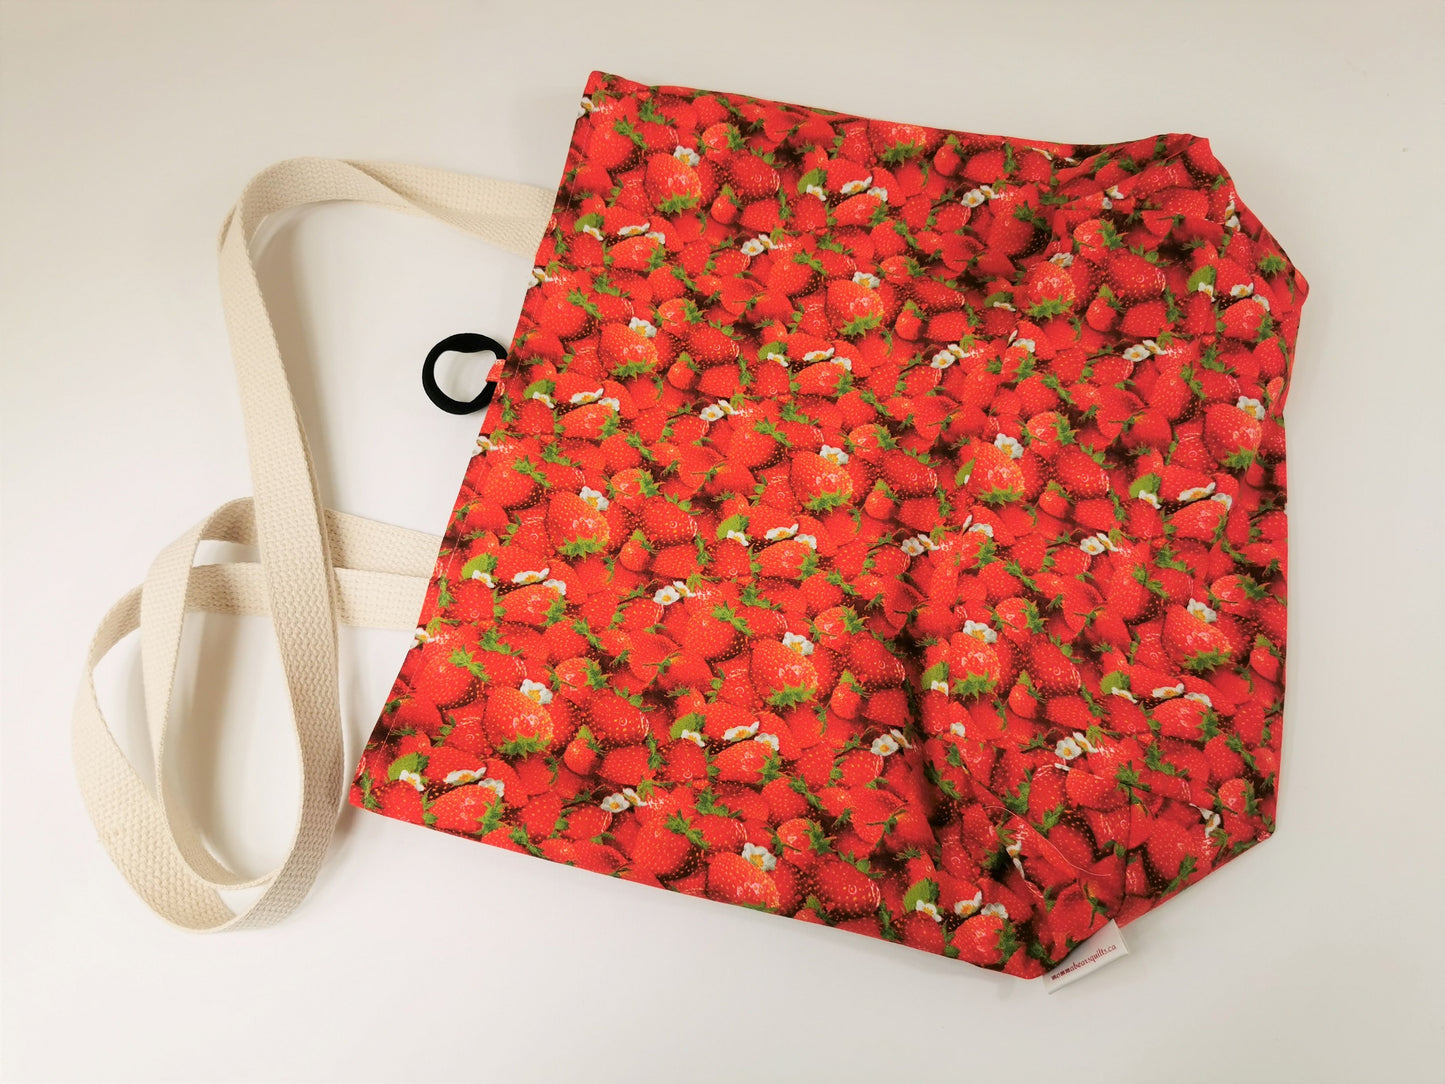 basic tote bag, large reusable cotton shopping bag, compact for purse, sturdy with two layers of fabric, strawberry fabric